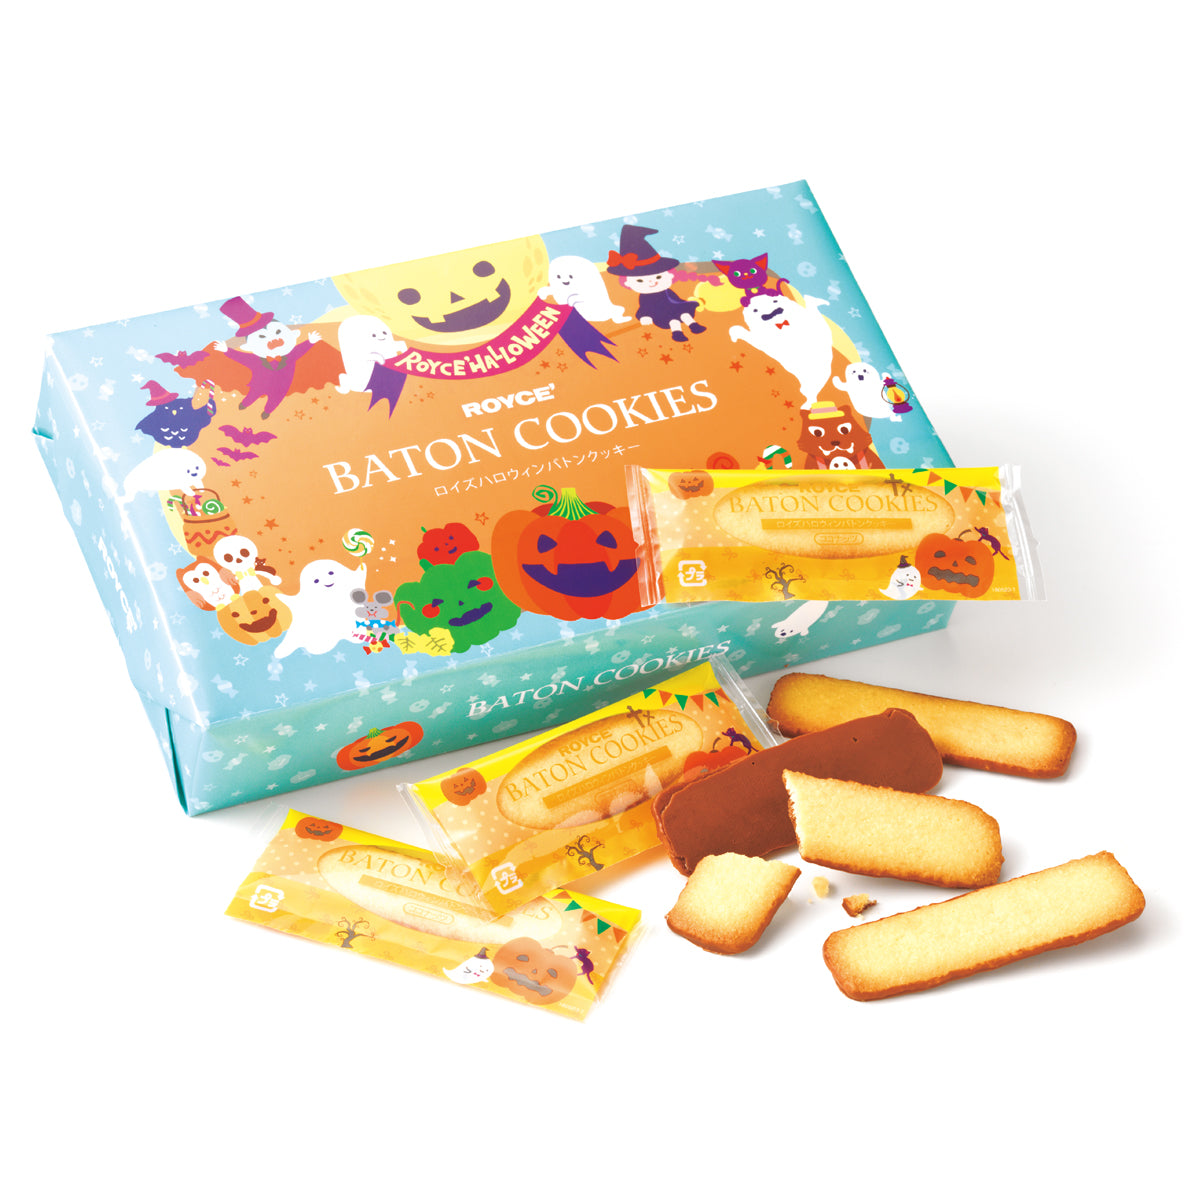 Image shows a blue and orange box on left with illustrations of ghosts, animals and pumpkins. Text says ROYCE' Halloween ROYCE' Baton Cookies. Accents include cookies in yellow and brown. Some cookies have yellow wrapping with illustrations of ghosts, pumpkins, and trees. Background is in color white.